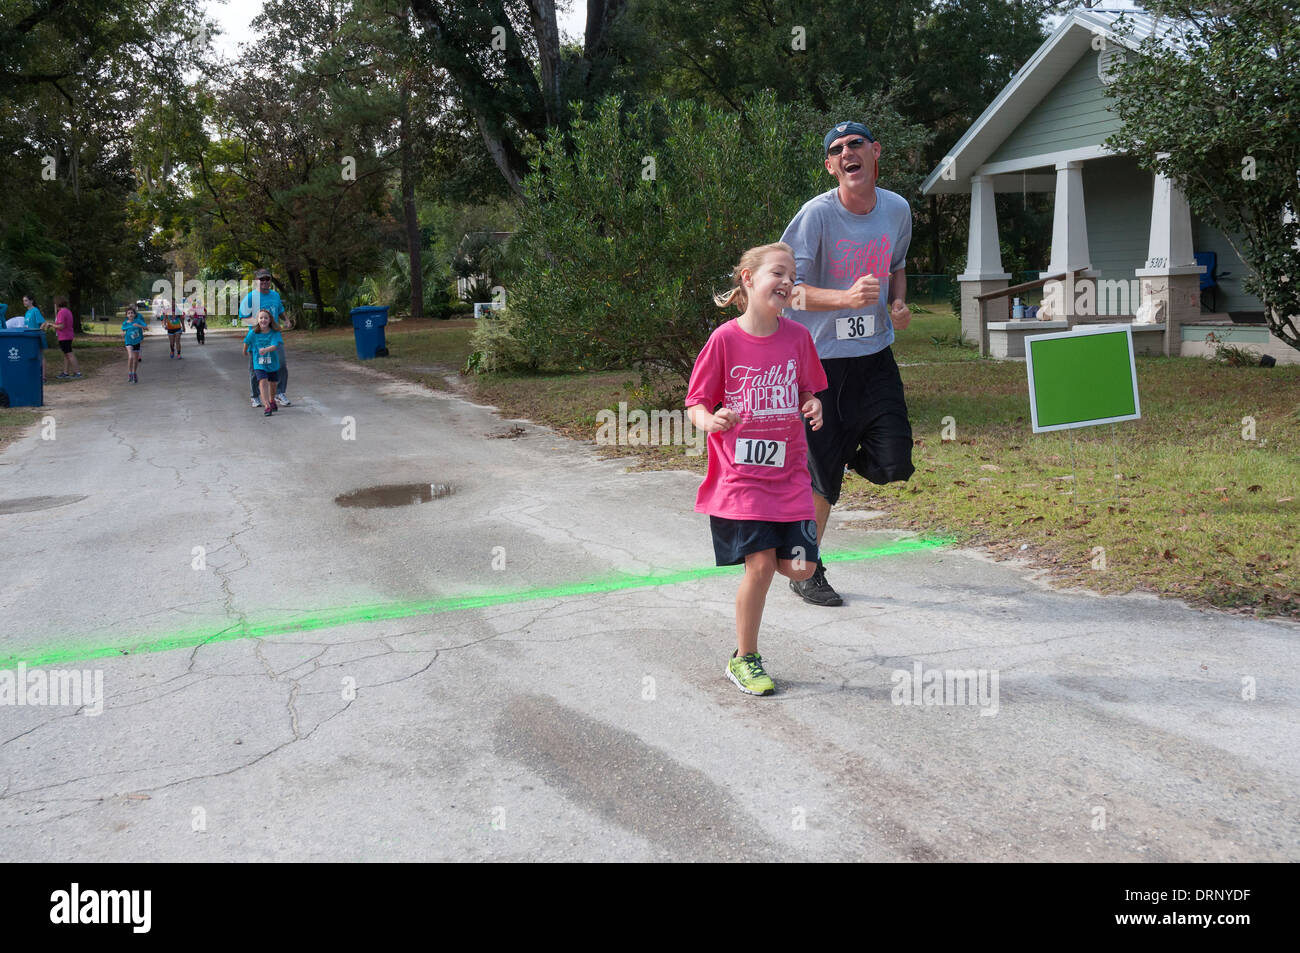 Crossing finish line at Crossroads Pregnancy Center annual 5K walk / run charity race in High Springs, Florida. Stock Photo